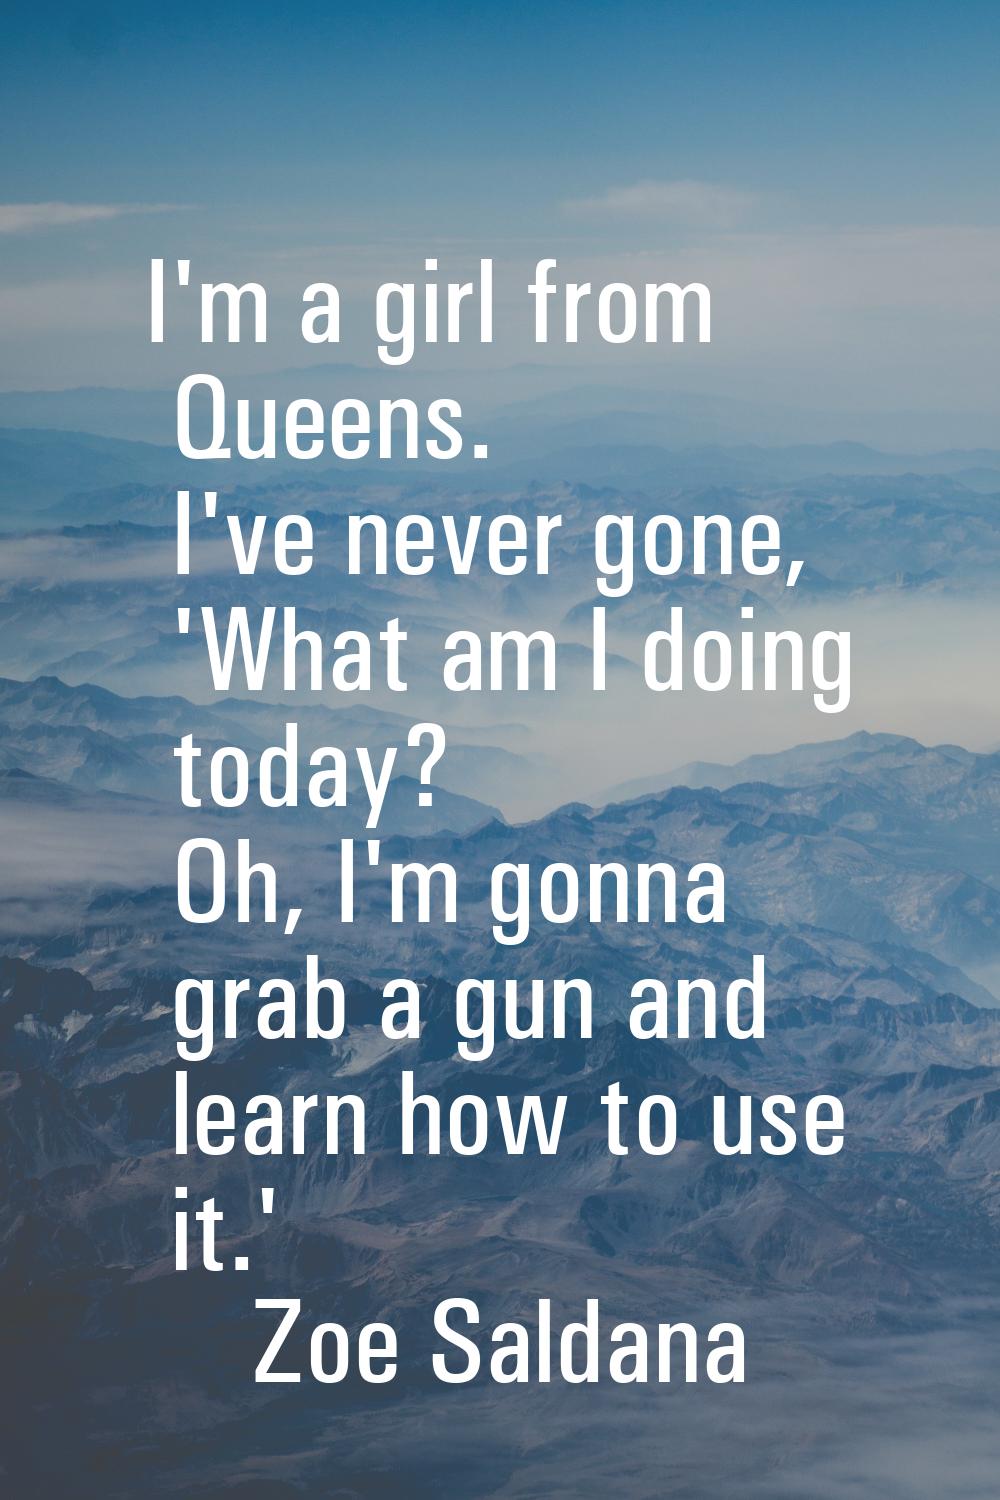 I'm a girl from Queens. I've never gone, 'What am I doing today? Oh, I'm gonna grab a gun and learn